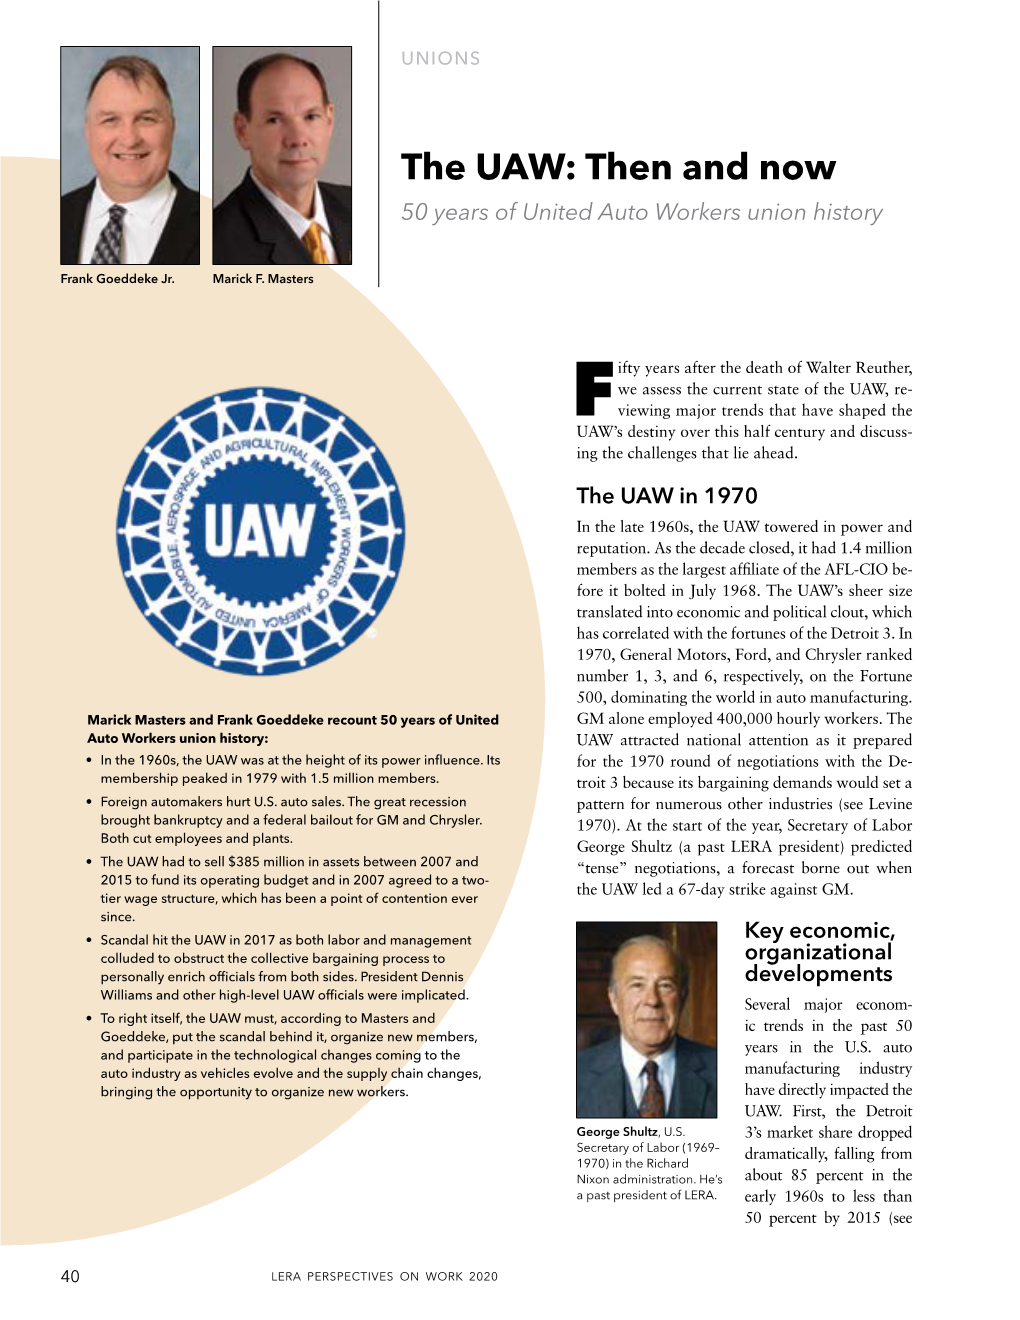 The UAW: Then and Now 50 Years of United Auto Workers Union History